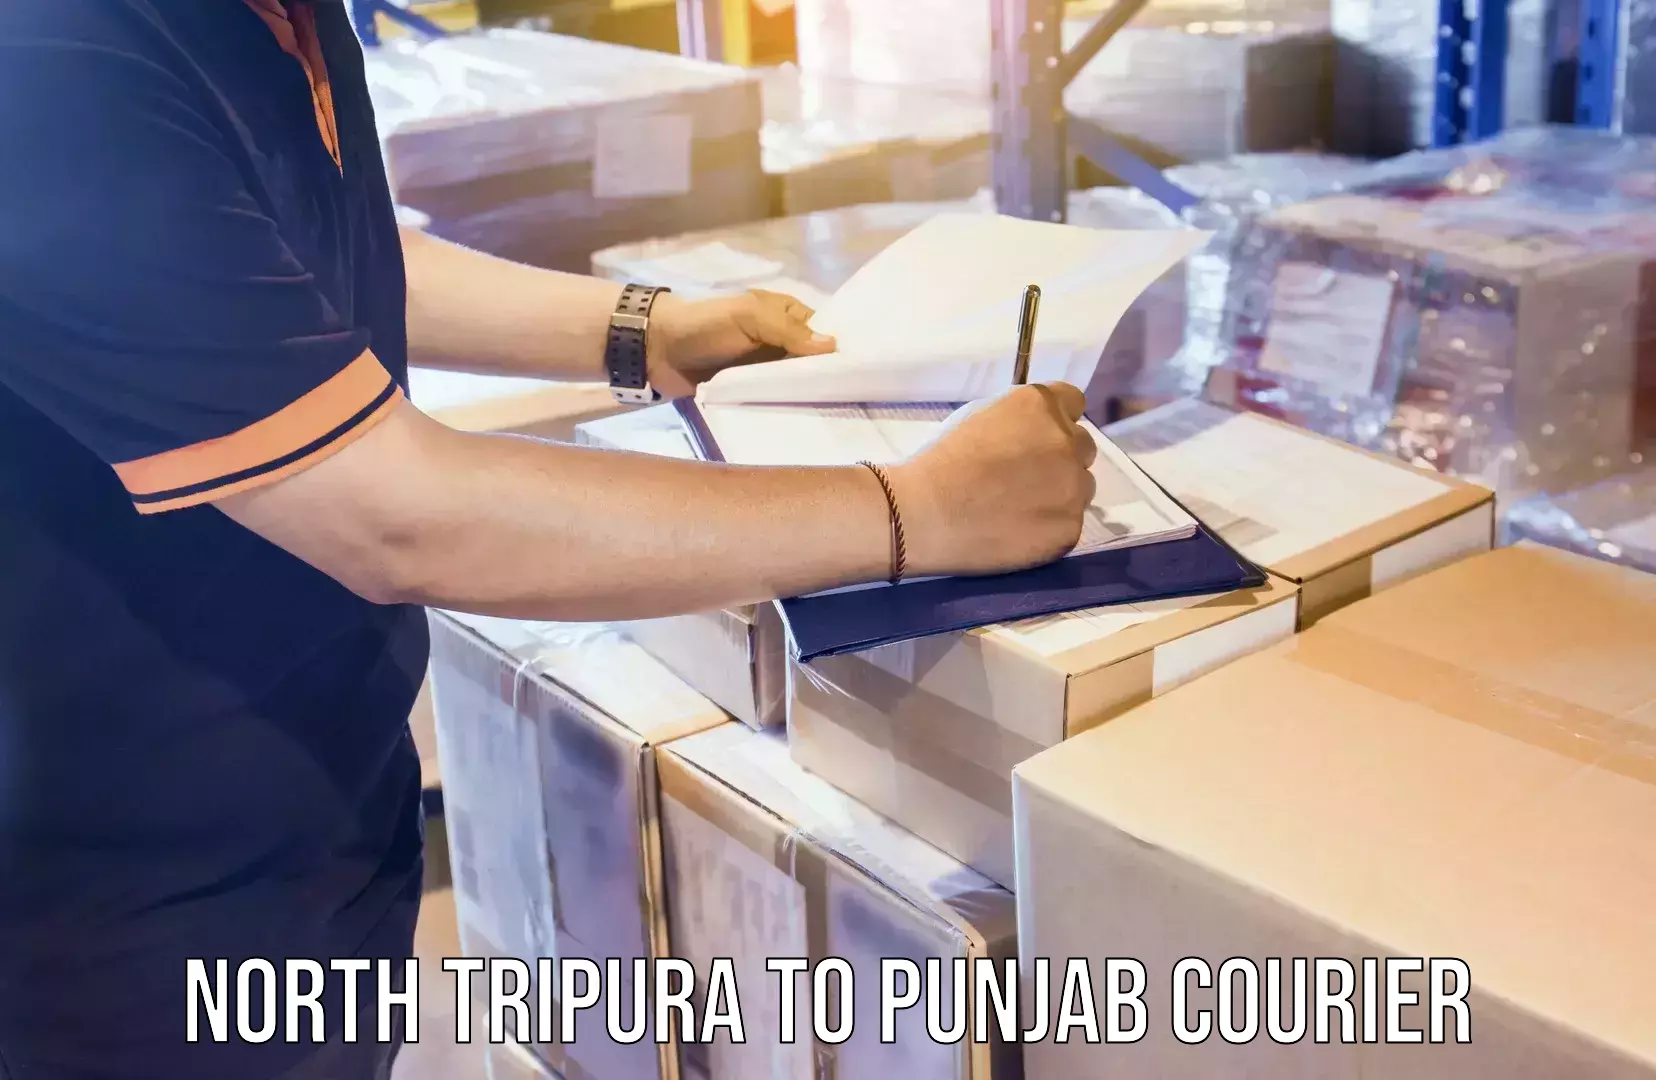 Cargo delivery service North Tripura to Punjab